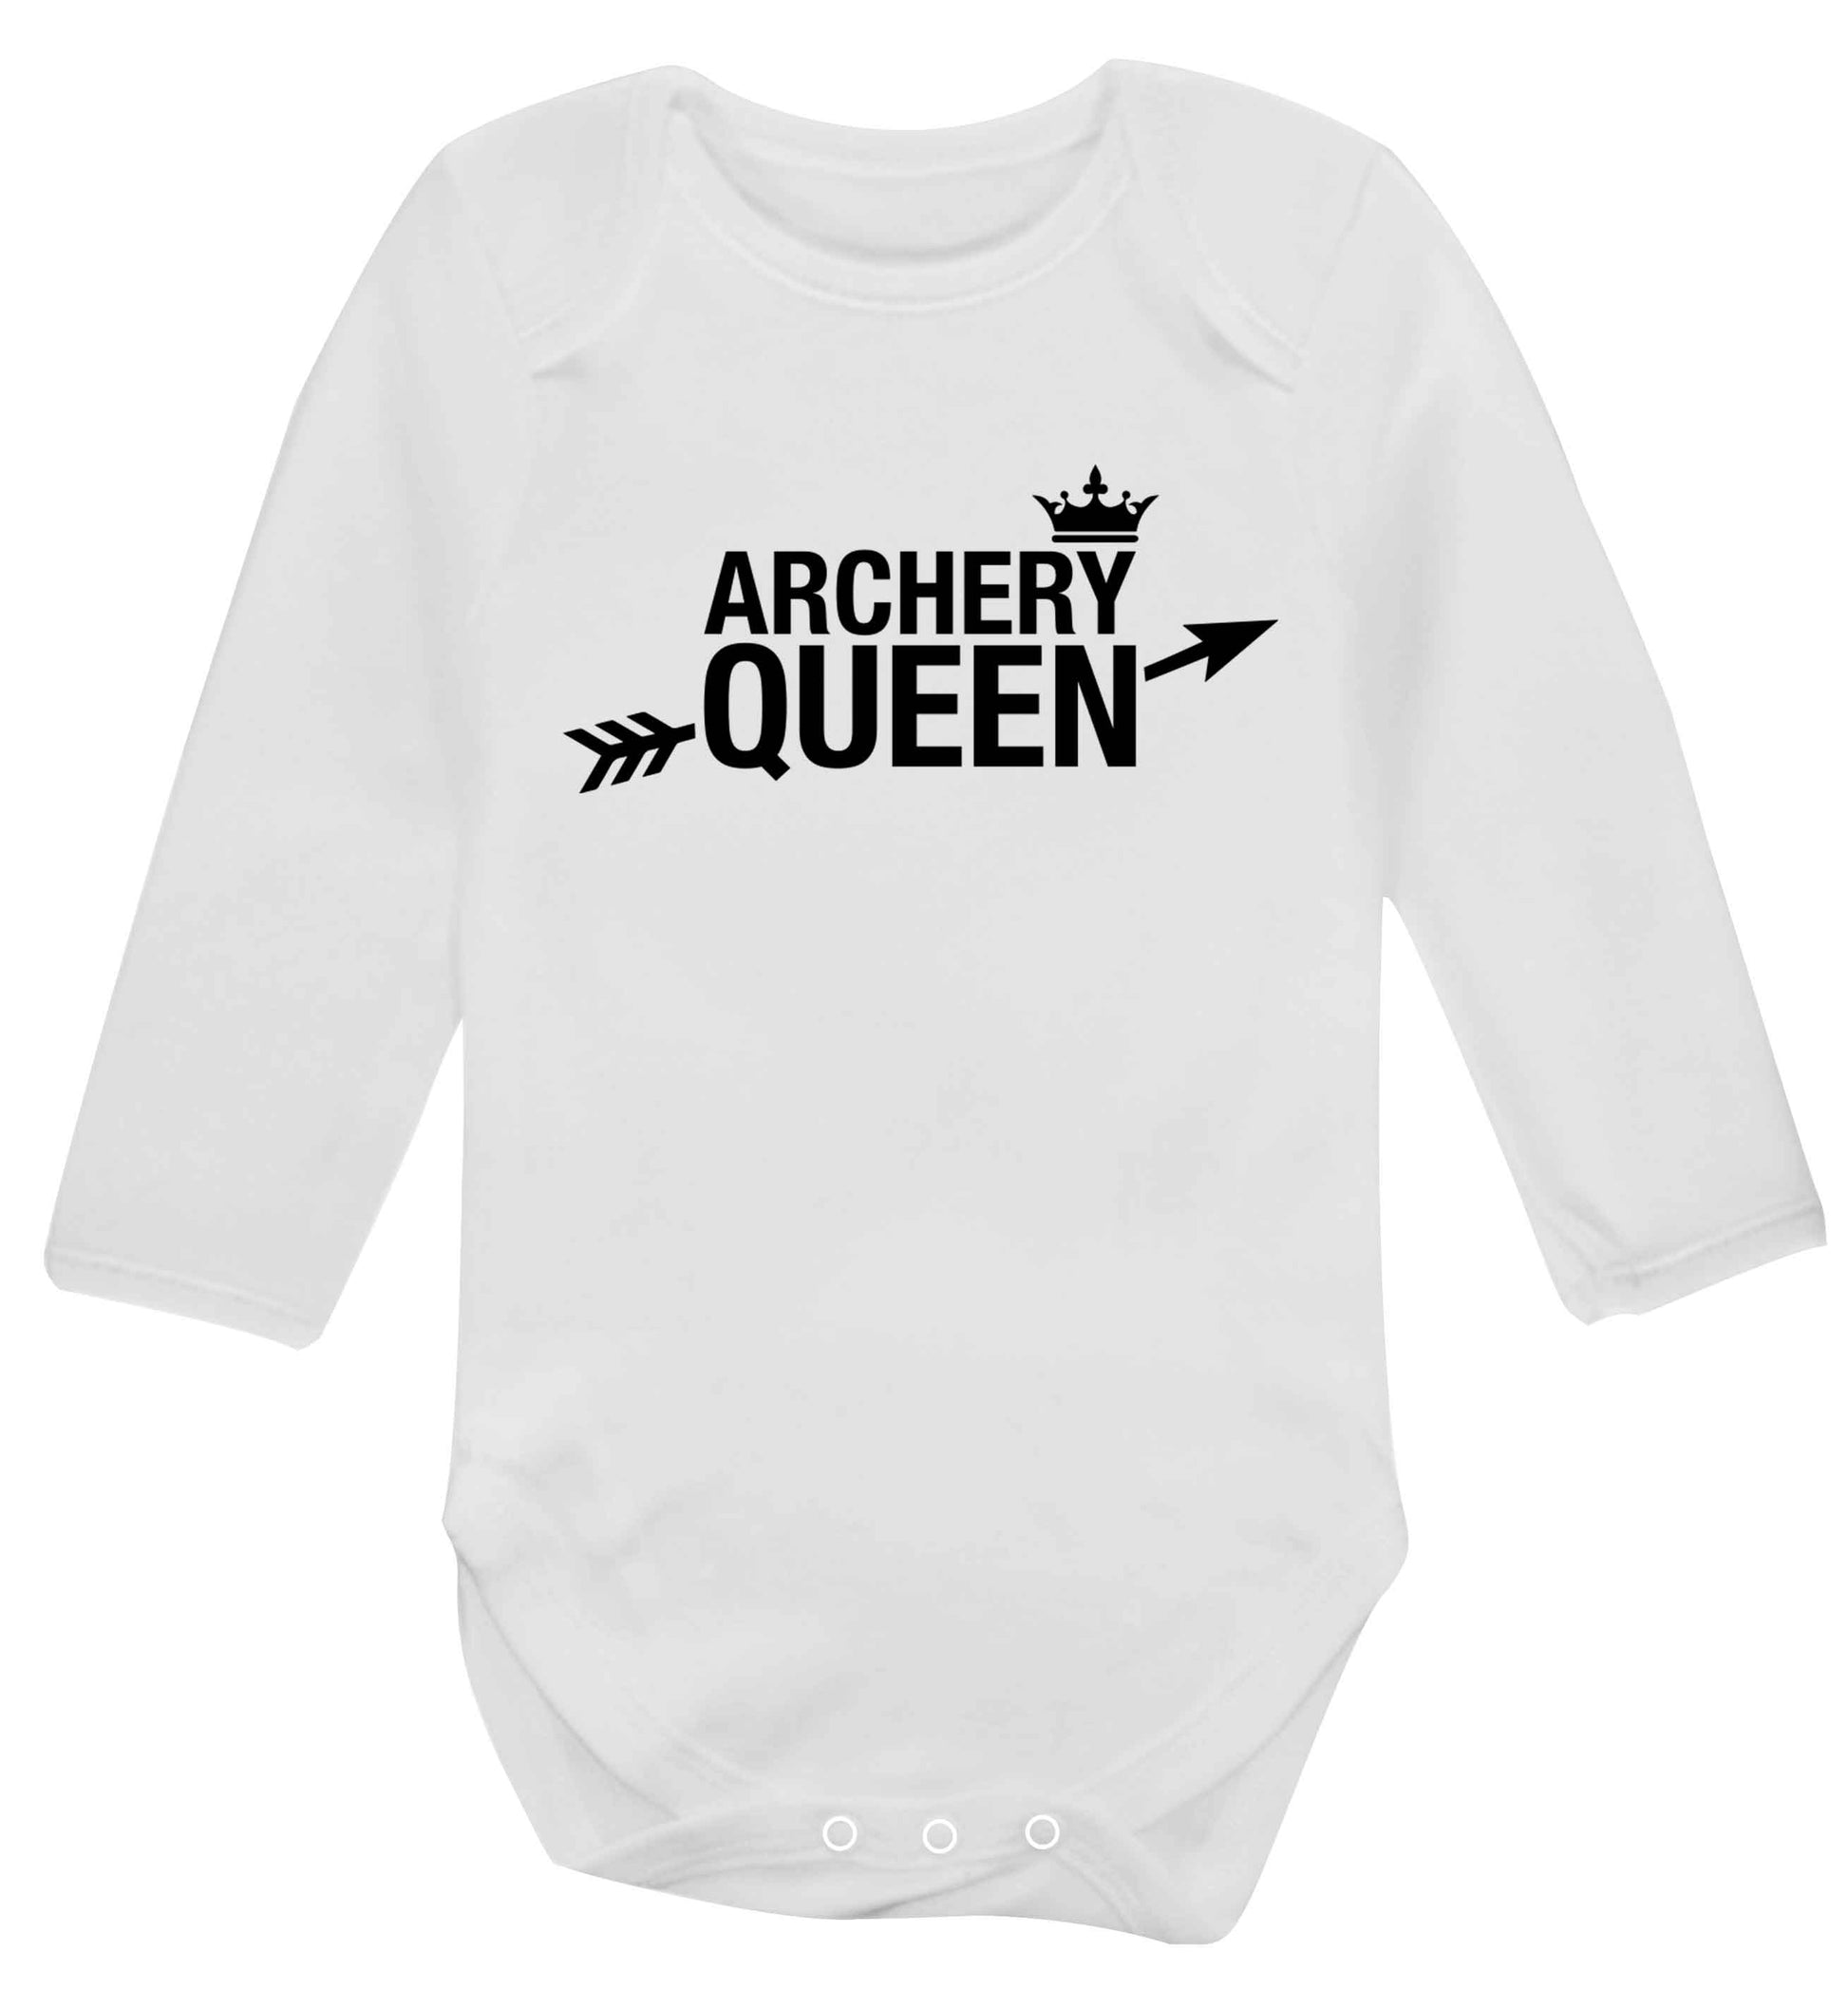 Archery queen Baby Vest long sleeved white 6-12 months